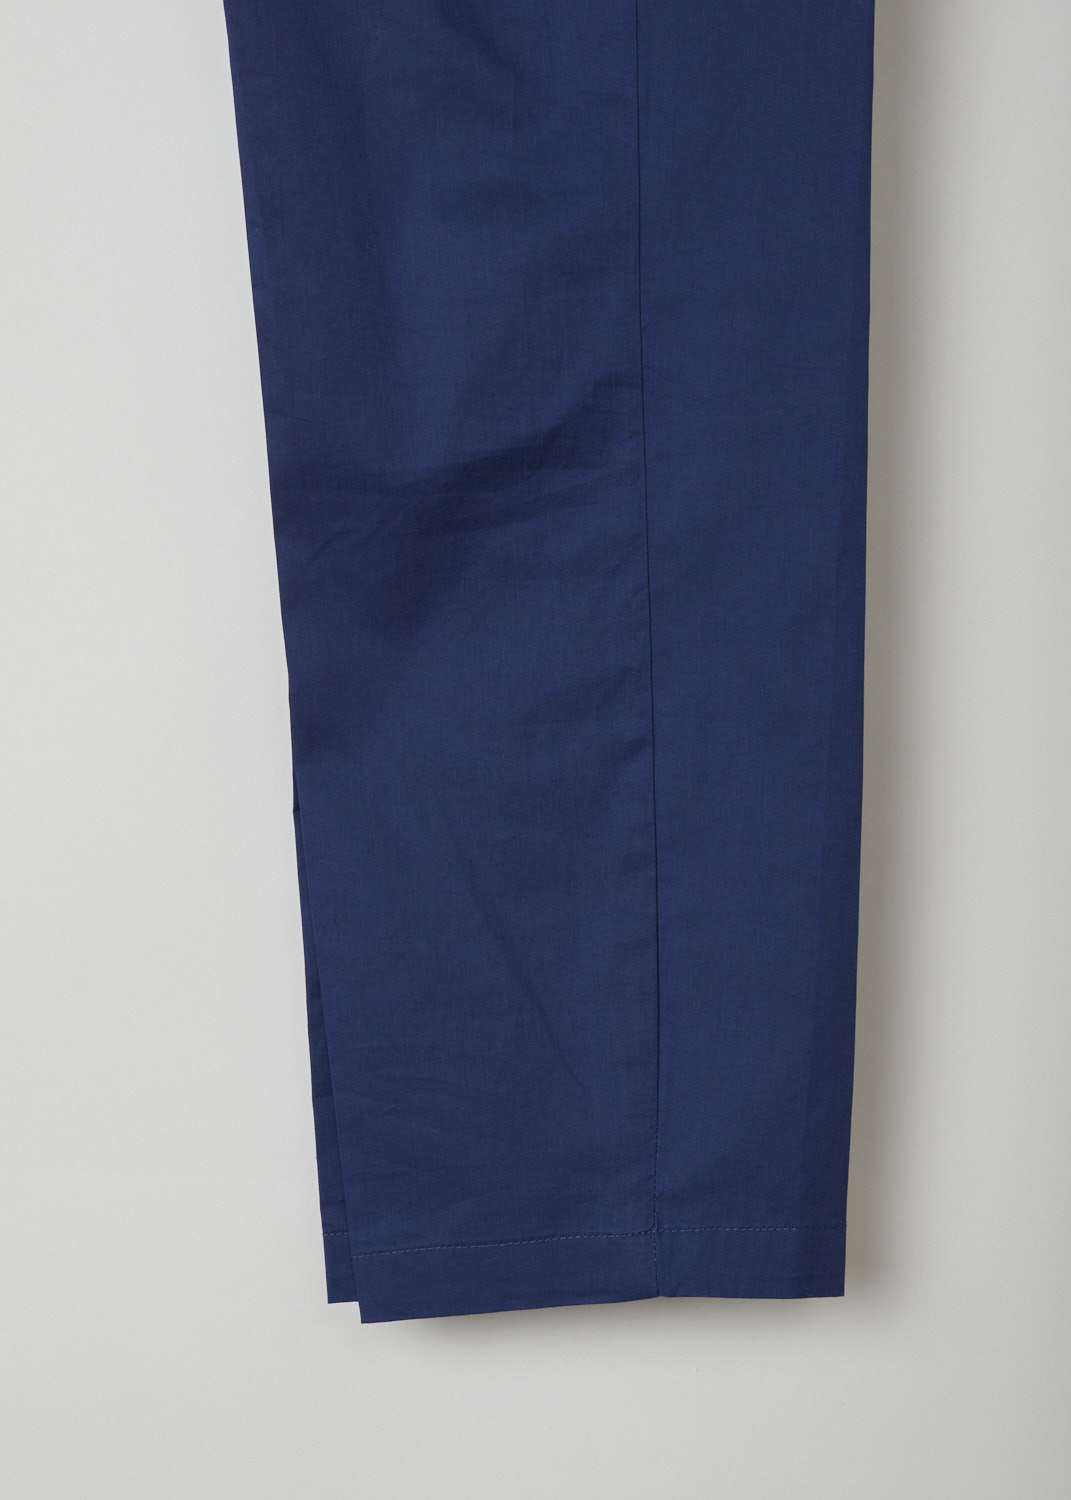 Closed, Indigo blue chino, jack_C91012_25E_22_558, blue, detail, Flat front chino made solely out of cotton and coloured to a lovely shade of indigo blue. Four pockets in total with two forward slanted pockets on the front, and two welt pockets on the backside.  